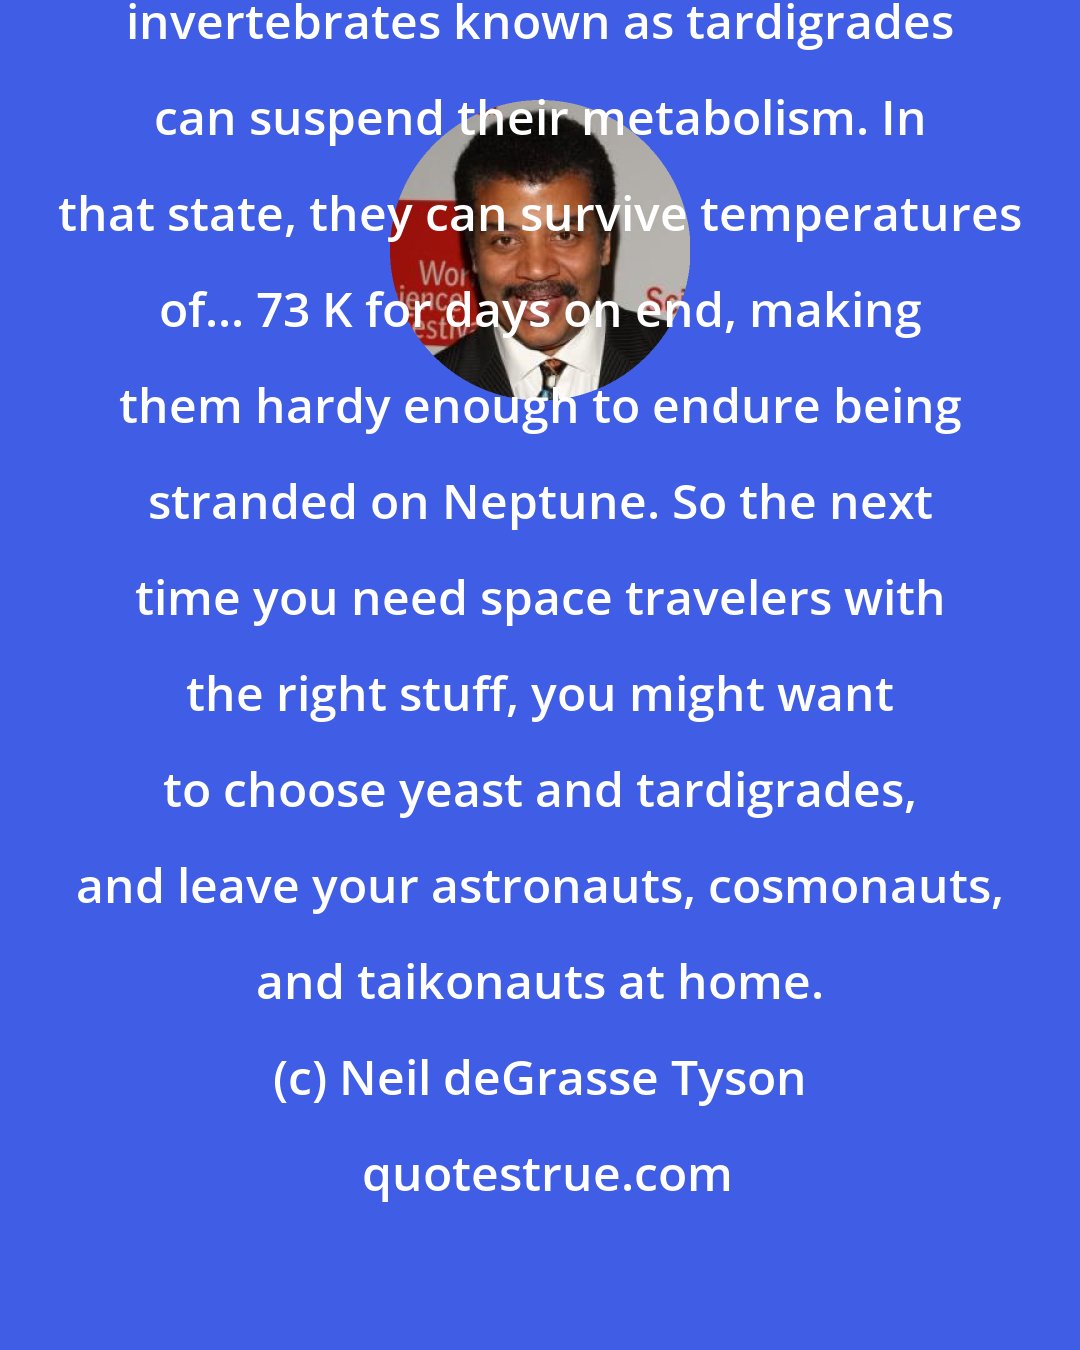 Neil deGrasse Tyson: When provoked, the itsy-bitsy invertebrates known as tardigrades can suspend their metabolism. In that state, they can survive temperatures of... 73 K for days on end, making them hardy enough to endure being stranded on Neptune. So the next time you need space travelers with the right stuff, you might want to choose yeast and tardigrades, and leave your astronauts, cosmonauts, and taikonauts at home.